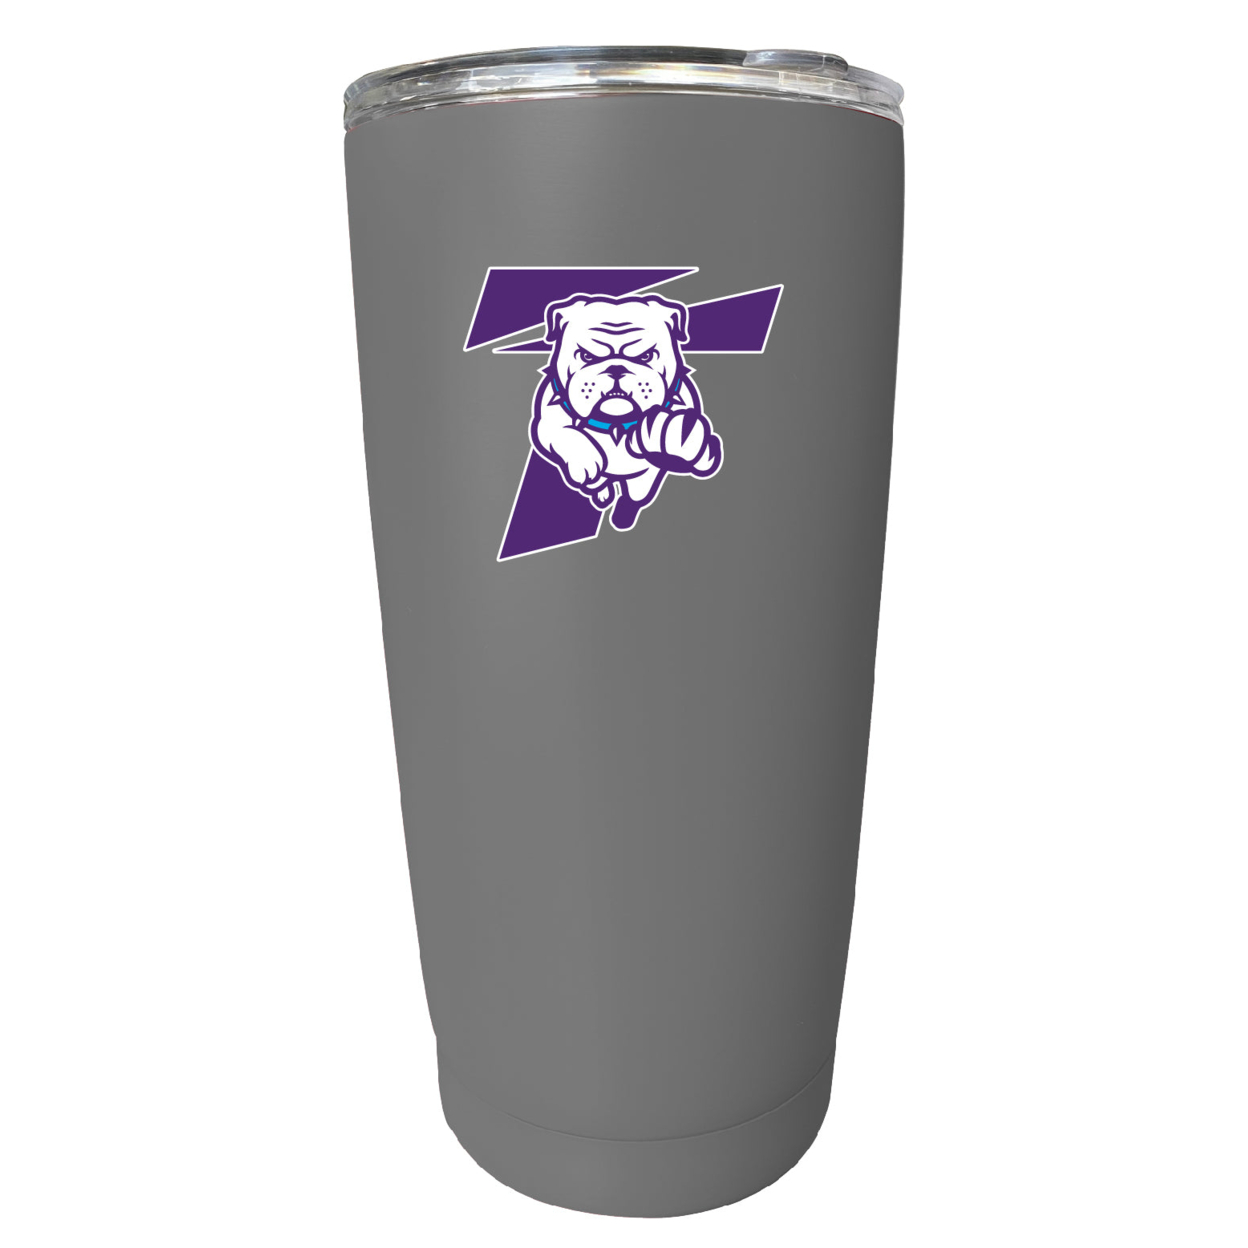 Truman State University 16 Oz Stainless Steel Insulated Tumbler - Gray